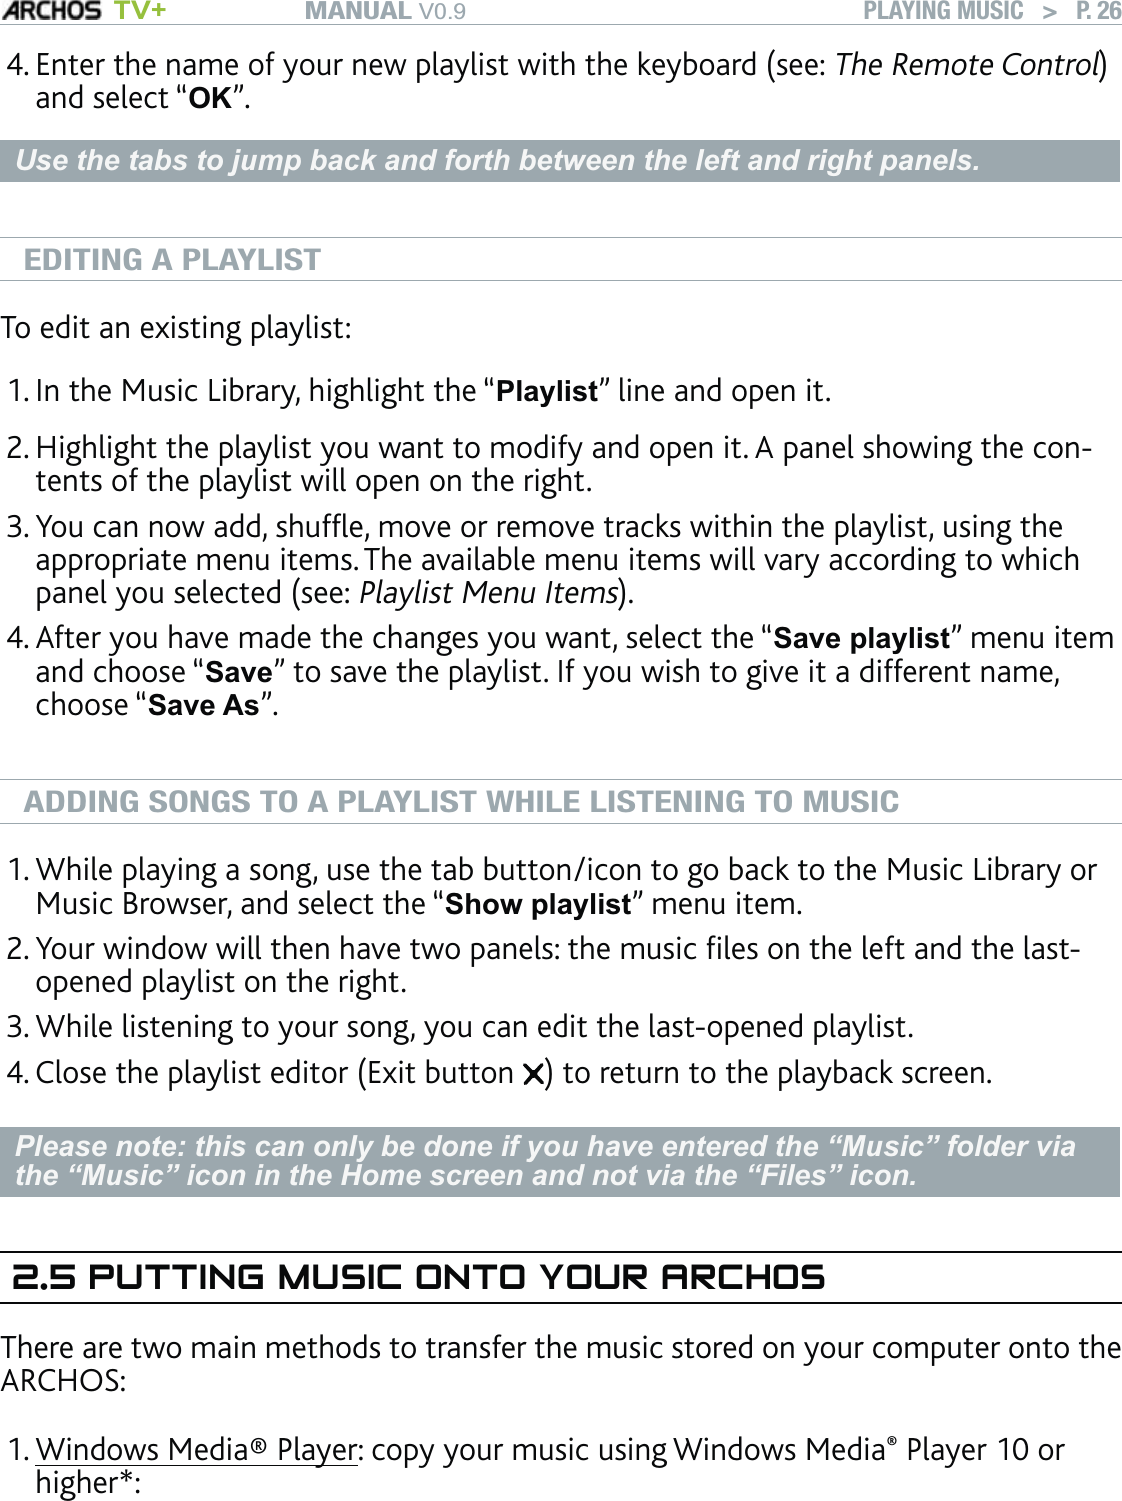 MANUAL V0.9 TV+ PLAYING MUSIC   &gt;   P. 26Enter the name of your new playlist with the keyboard (see: The Remote Control) and select “OK”.Use the tabs to jump back and forth between the left and right panels.EDITING A PLAYLISTTo edit an existing playlist: In the Music Library, highlight the “Playlist” line and open it.Highlight the playlist you want to modify and open it. A panel showing the con-tents of the playlist will open on the right.You can now add, shufﬂe, move or remove tracks within the playlist, using the appropriate menu items. The available menu items will vary according to which panel you selected (see: Playlist Menu Items). After you have made the changes you want, select the “Save playlist” menu item and choose “Save” to save the playlist. If you wish to give it a different name, choose “Save As”.ADDING SONGS TO A PLAYLIST WHILE LISTENING TO MUSICWhile playing a song, use the tab button/icon to go back to the Music Library or Music Browser, and select the “Show playlist” menu item.Your window will then have two panels: the music ﬁles on the left and the last-opened playlist on the right.While listening to your song, you can edit the last-opened playlist.Close the playlist editor (Exit button  ) to return to the playback screen.Please note: this can only be done if you have entered the “Music” folder via the “Music” icon in the Home screen and not via the “Files” icon.2.5 PUTTING MUSIC ONTO YOUR ARCHOSThere are two main methods to transfer the music stored on your computer onto the ARCHOS:Windows Media® Player: copy your music using Windows Media® Player 10 or higher*:4.1.2.3.4.1.2.3.4.1.